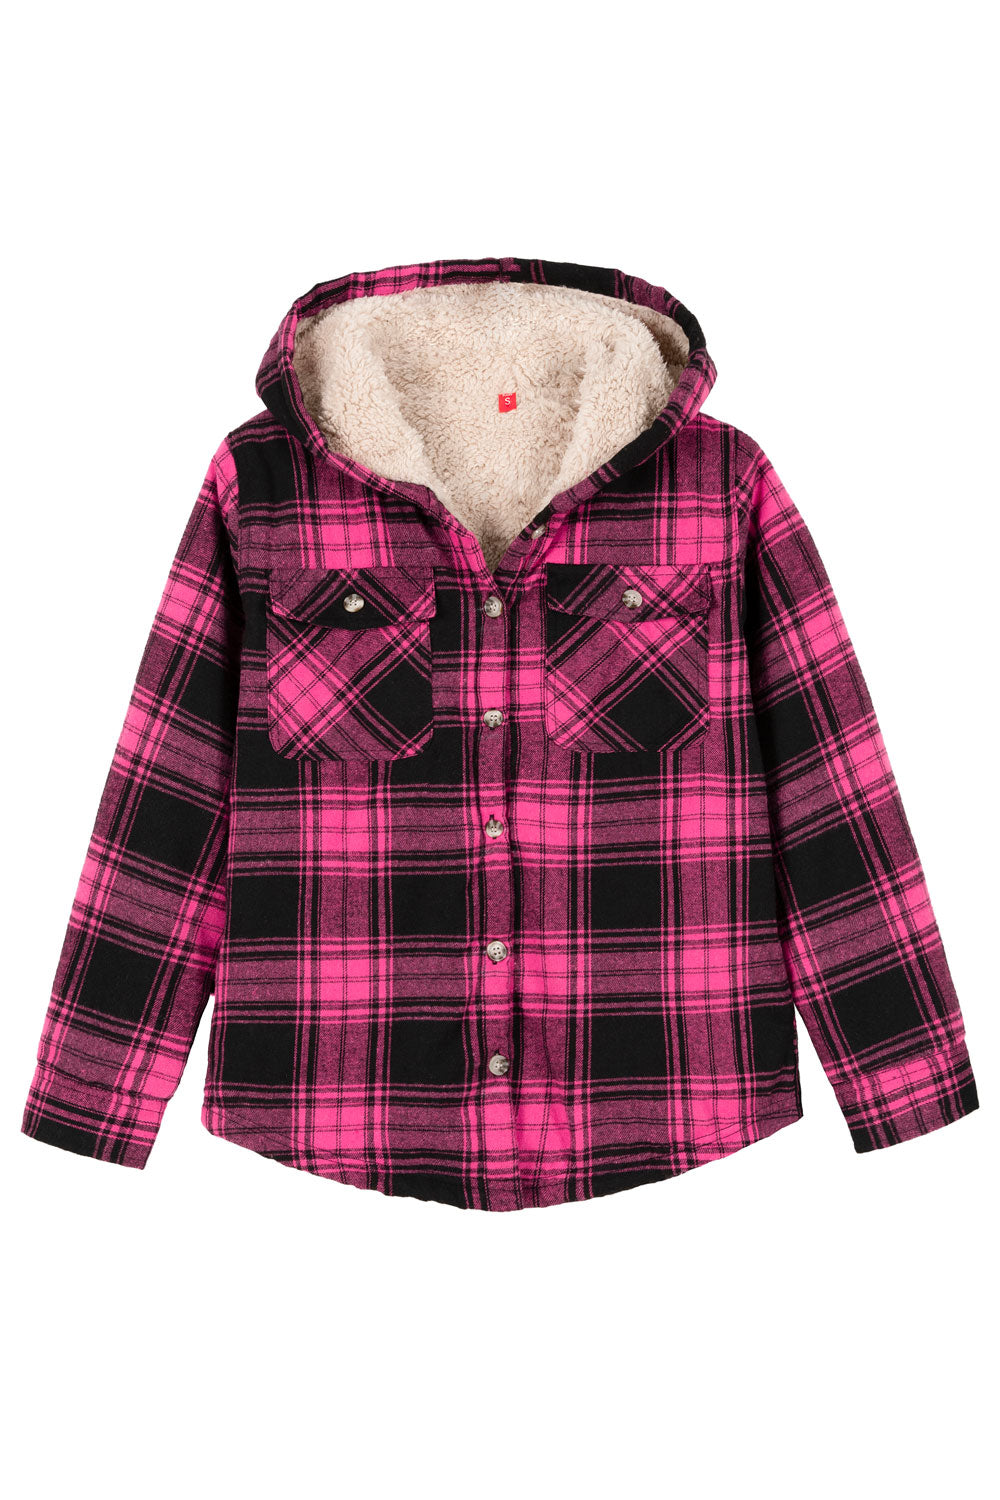 Girls Hooded Plaid Flannel Shirt Jacket Sherpa Lined Flannel Jacket ...